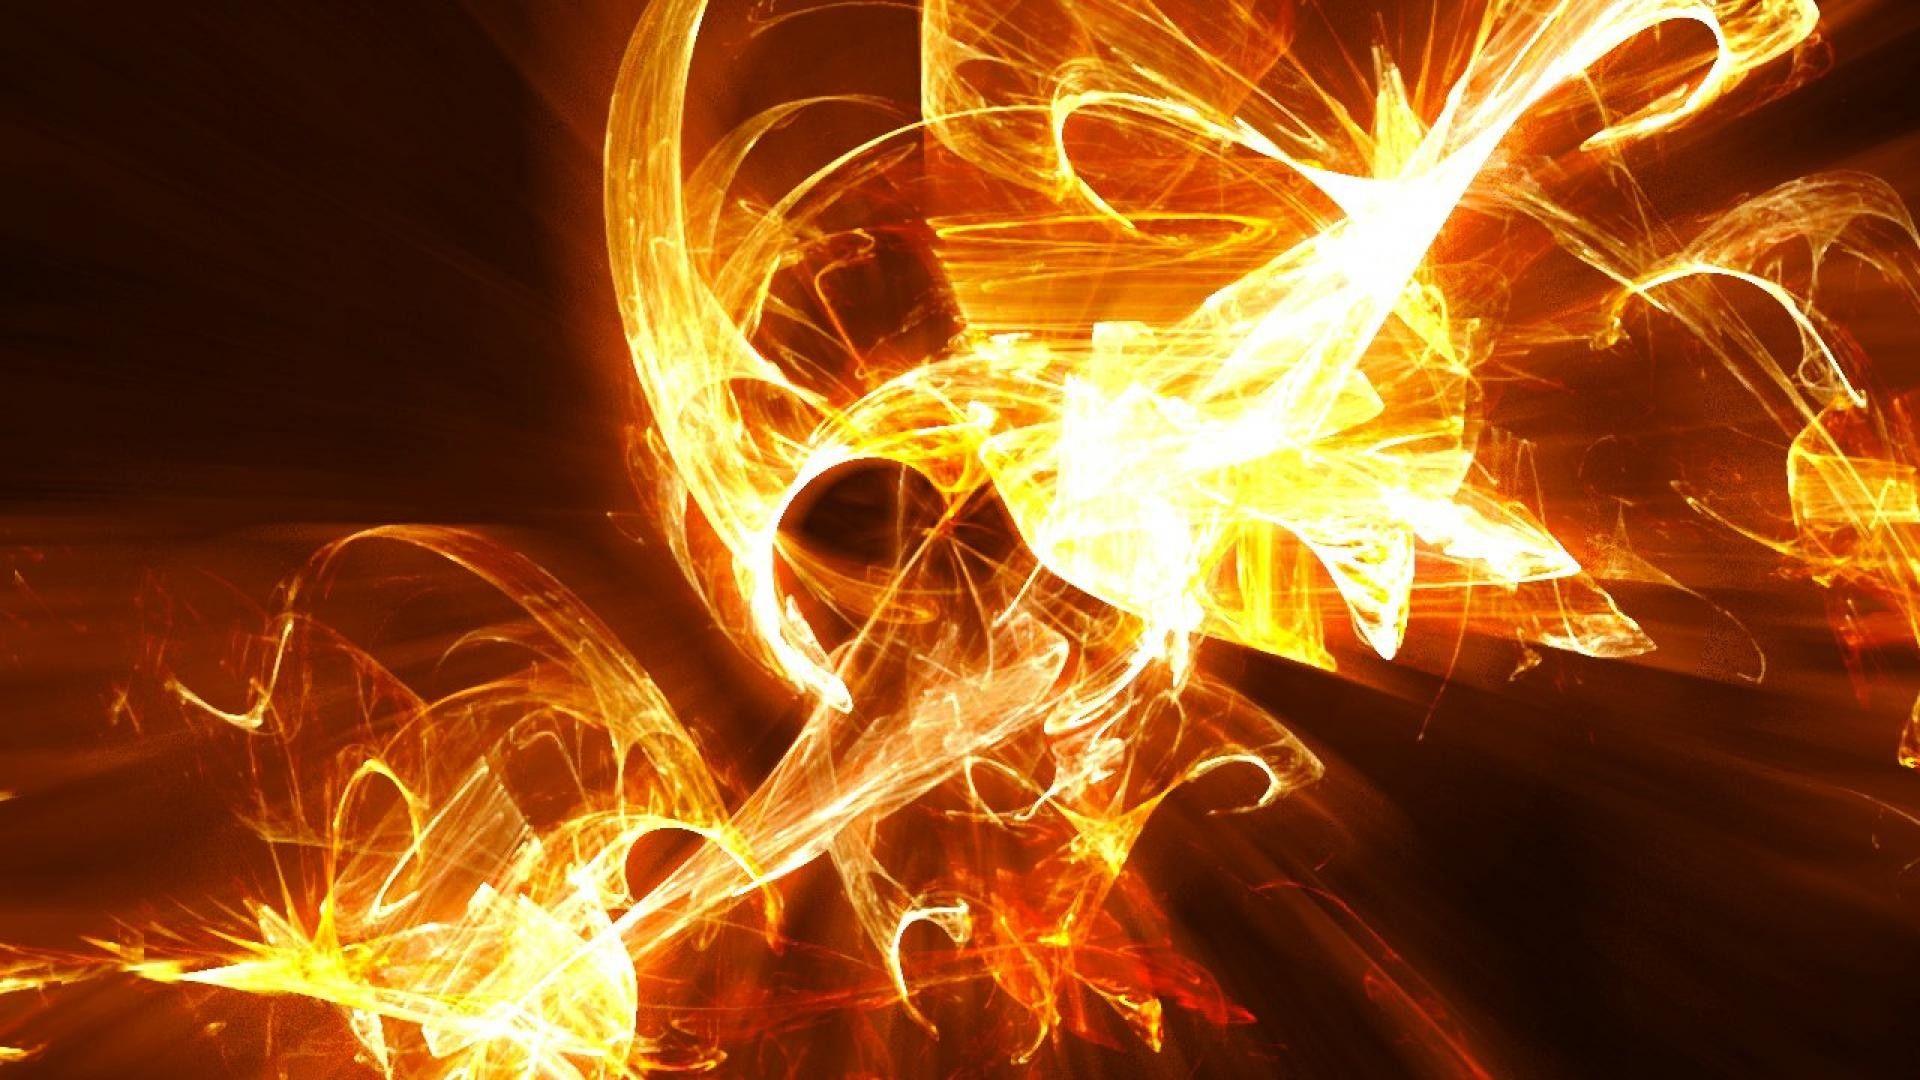 Abstract Fire Wallpapers Top Free Abstract Fire Backgrounds